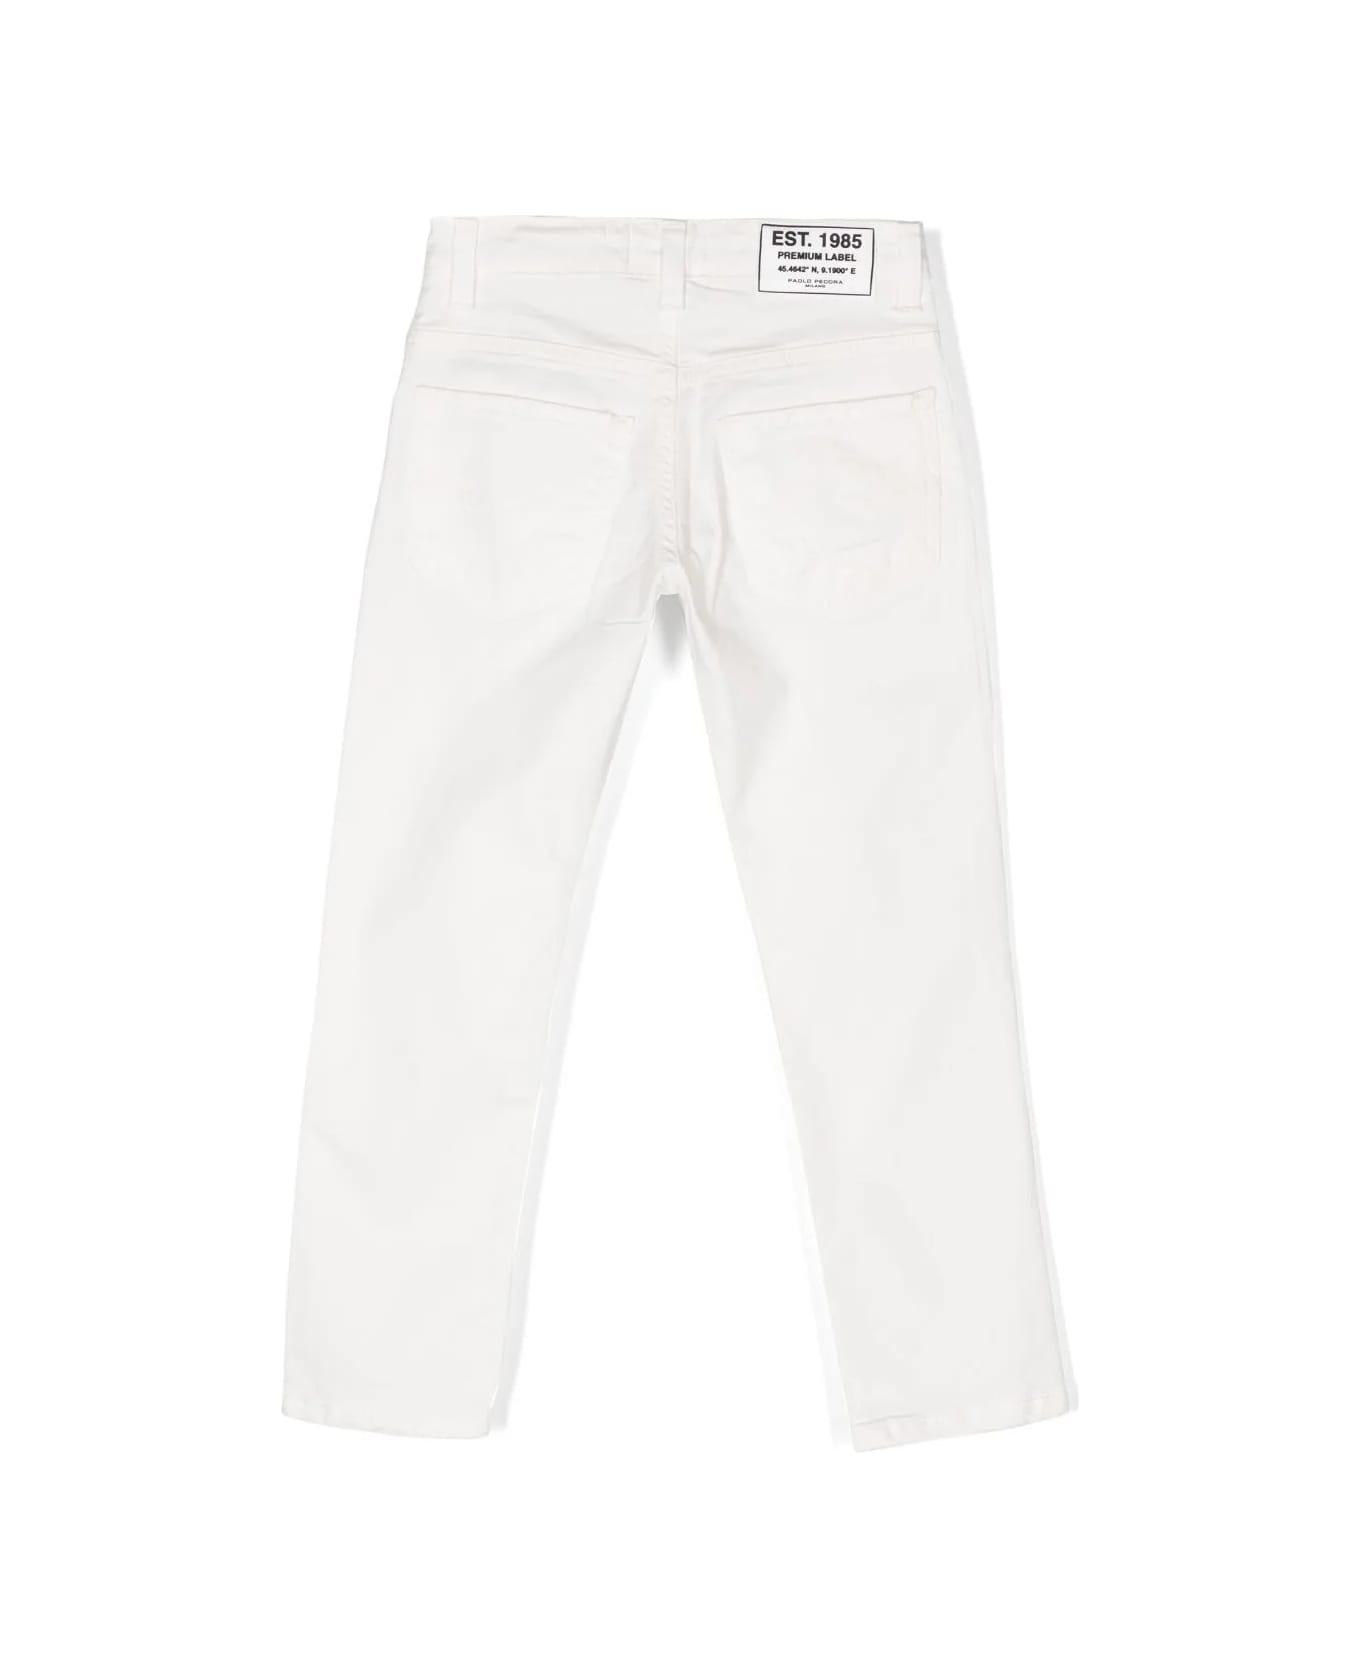 Paolo Pecora Jeans With Application - White ボトムス